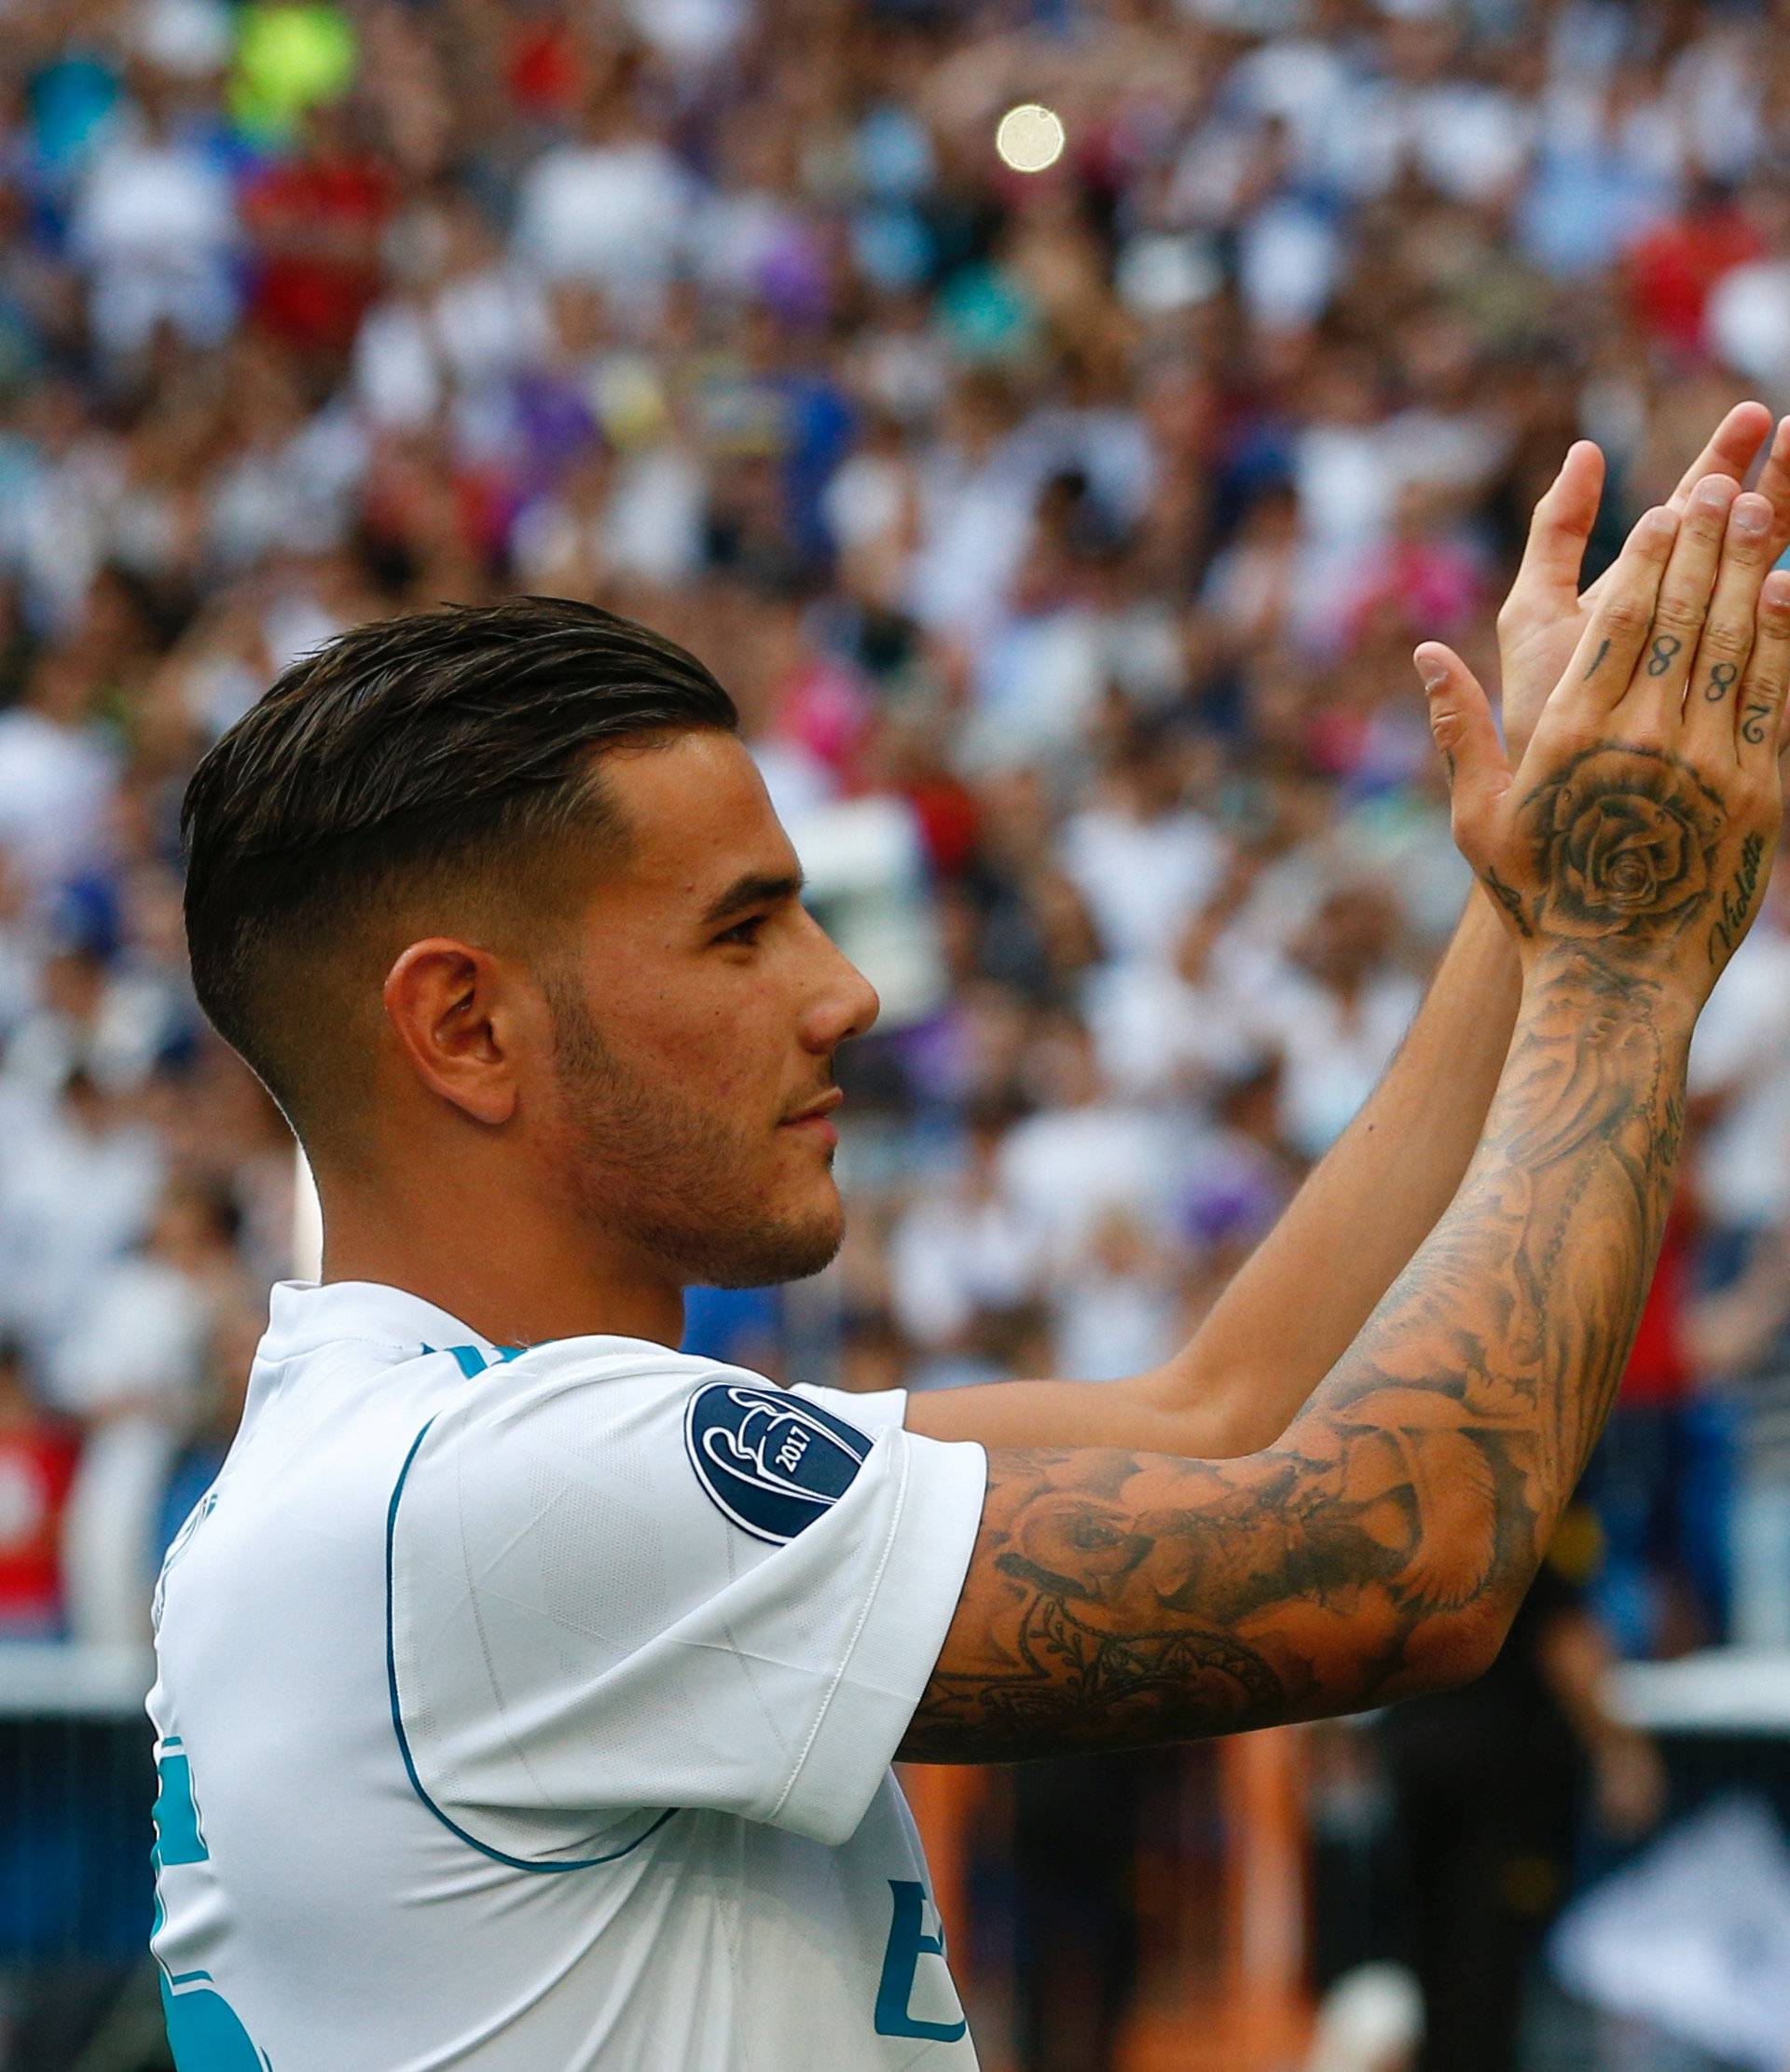 Real Madrid's new player Theo Hernandez acknowledges supporters during his presentation at the Santiago Bernabeu Stadium in Madrid